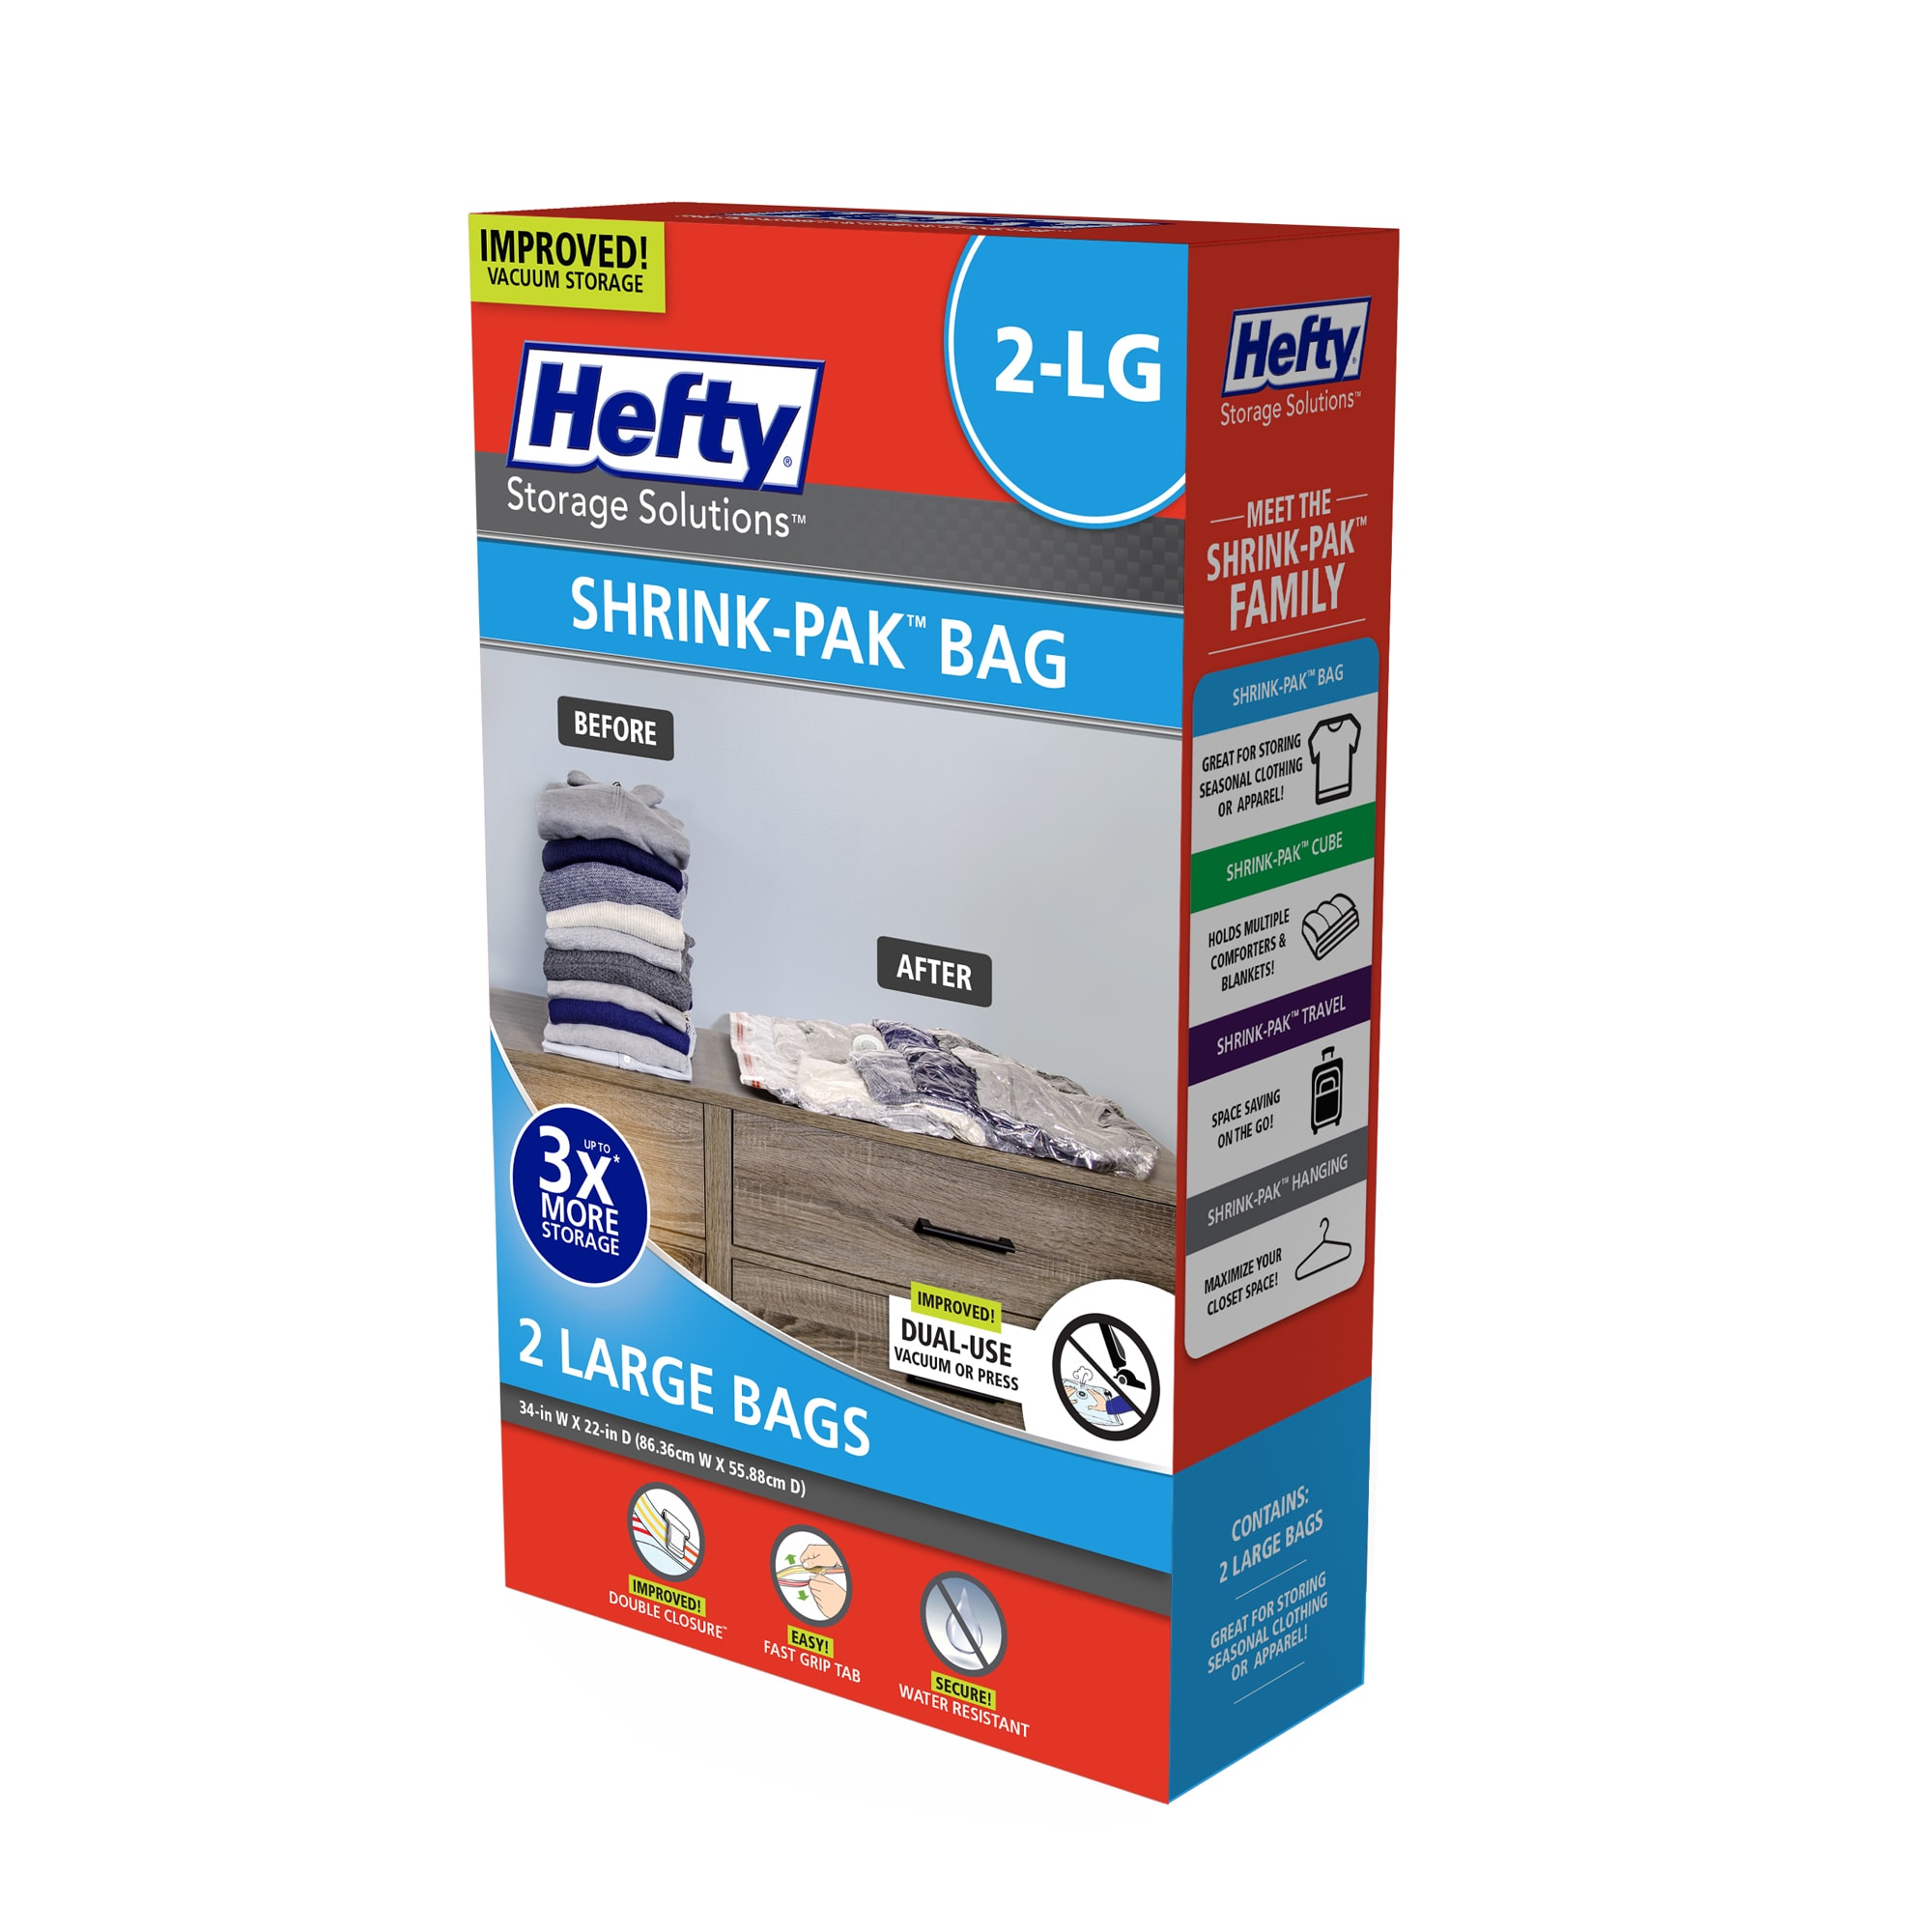 Vacuum Storage Bags,Vacuum Storage Space Saver,Double Zip Seal Reusable for  Bedding,Pillow,Mattres,Quilt,Clothes,Sweater,Blanket